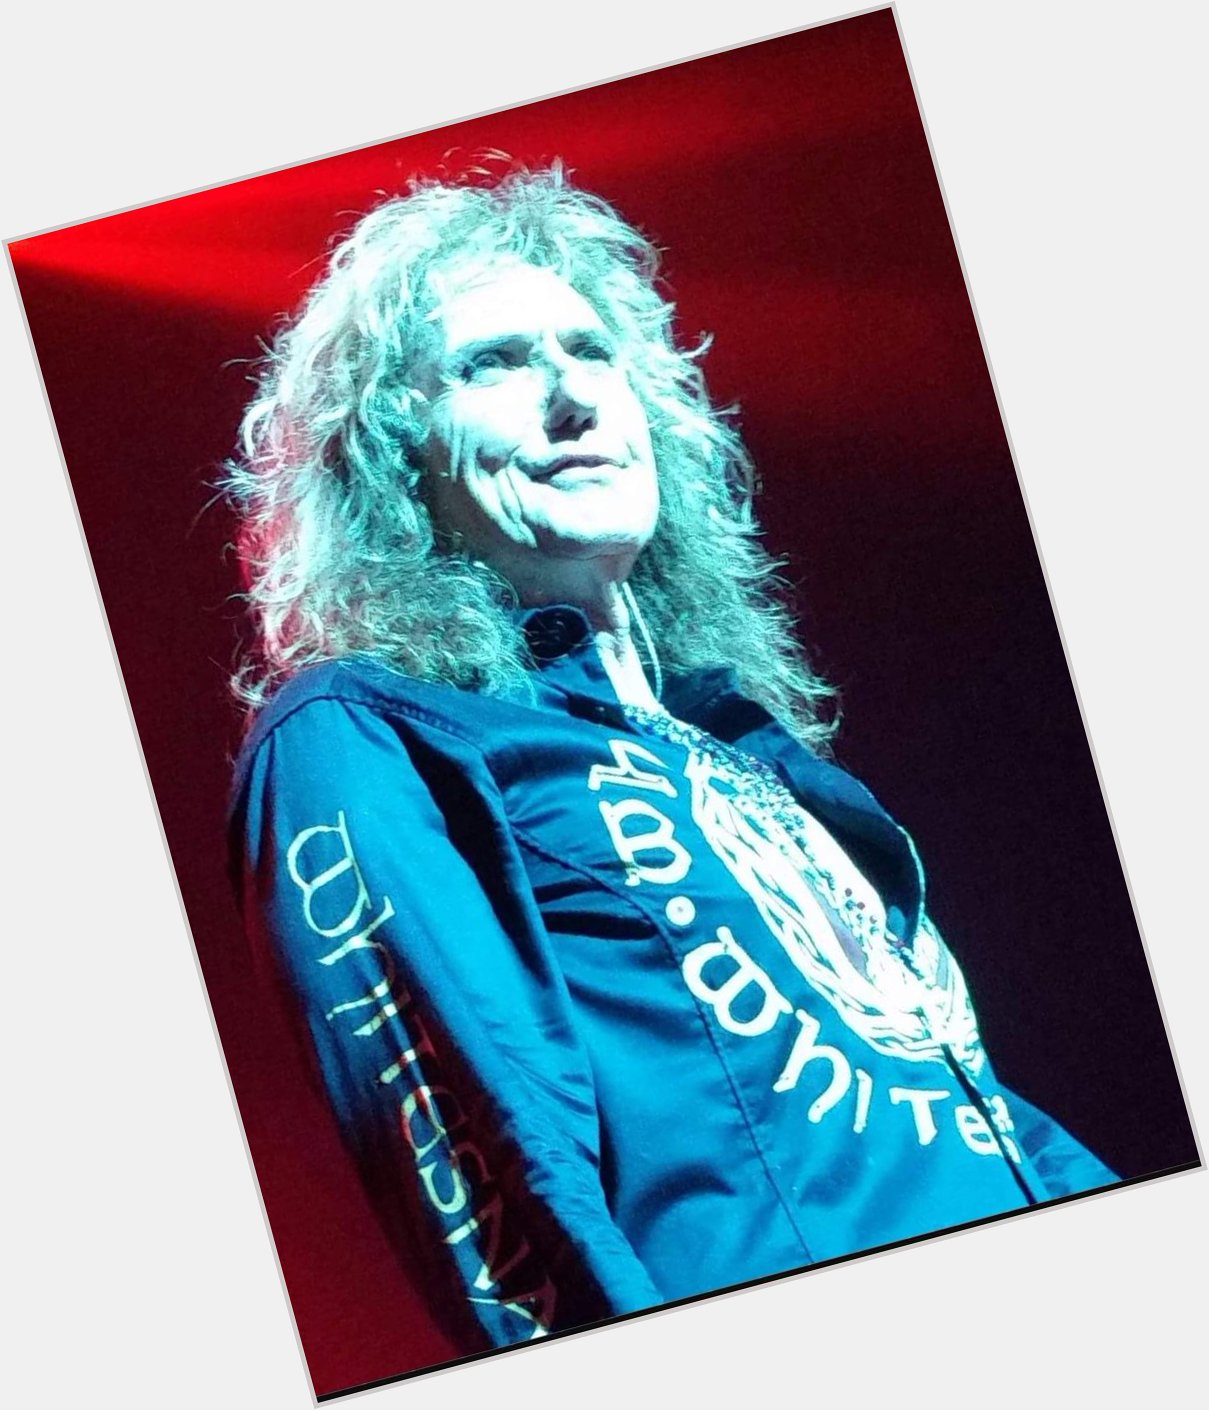 A Very Happy 69th. Birthday Wish Today To David Coverdale!!!
CHEERS!!!
All The Best!!!       